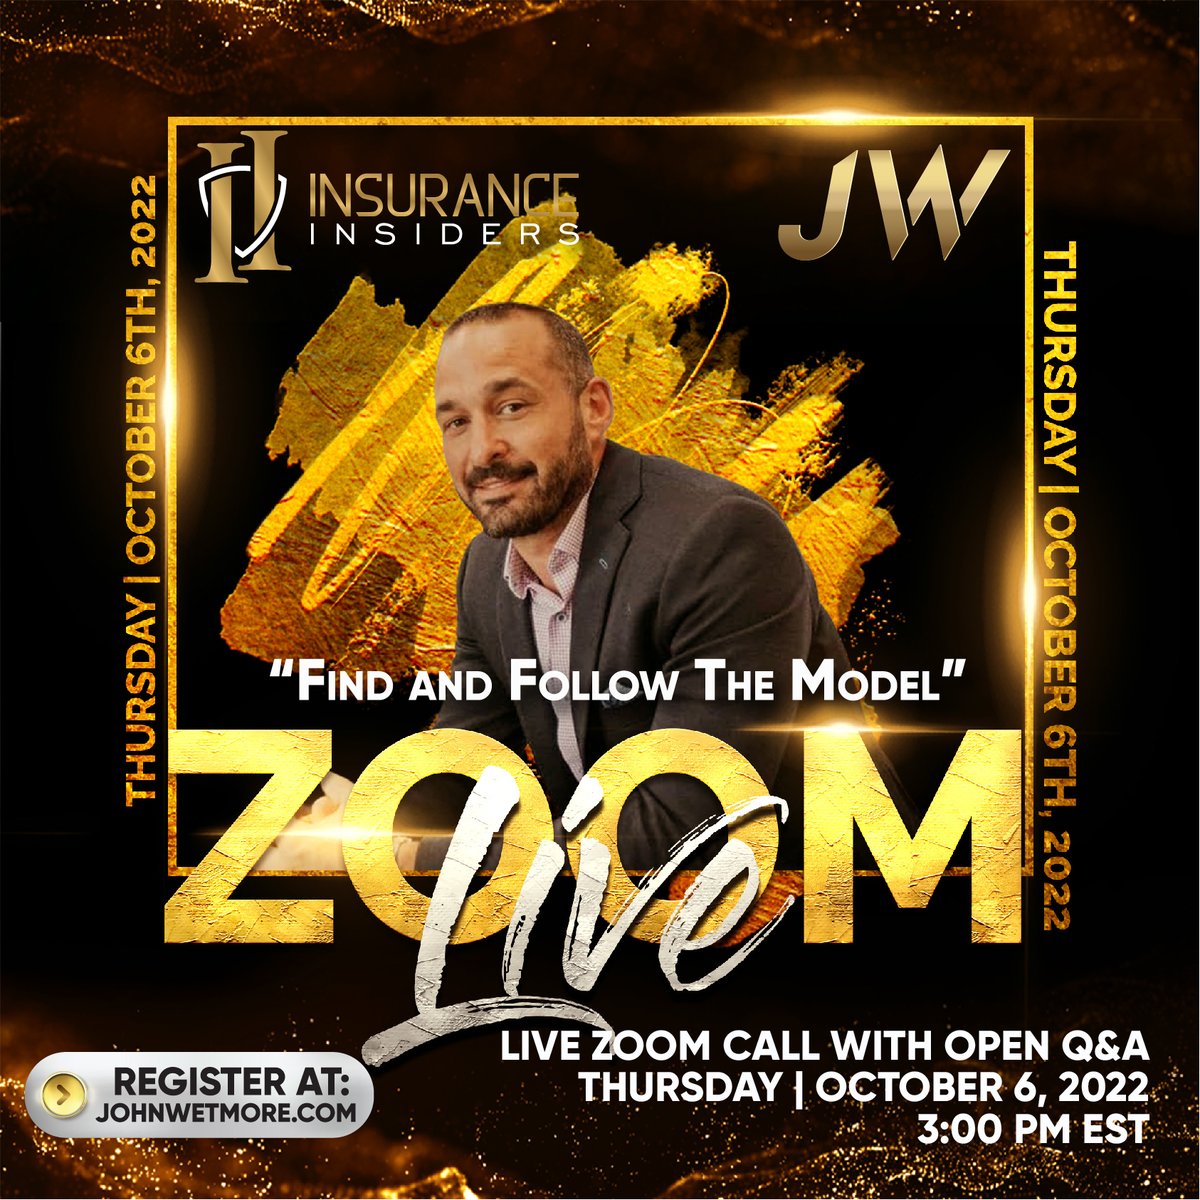 INSURANCE INSIDERS ZOOM CALL (with open Q&A afterwards)
Thursday, October 6, 2022 3:00pm EST

REGISTER NOW conta.cc/3SJeLWF
 or johnwetmore.com

#learnmorewithwetmore #jw #johnwetmore #domorewithwetmore #zoomcalls #followthemodel #findandfollow #domore